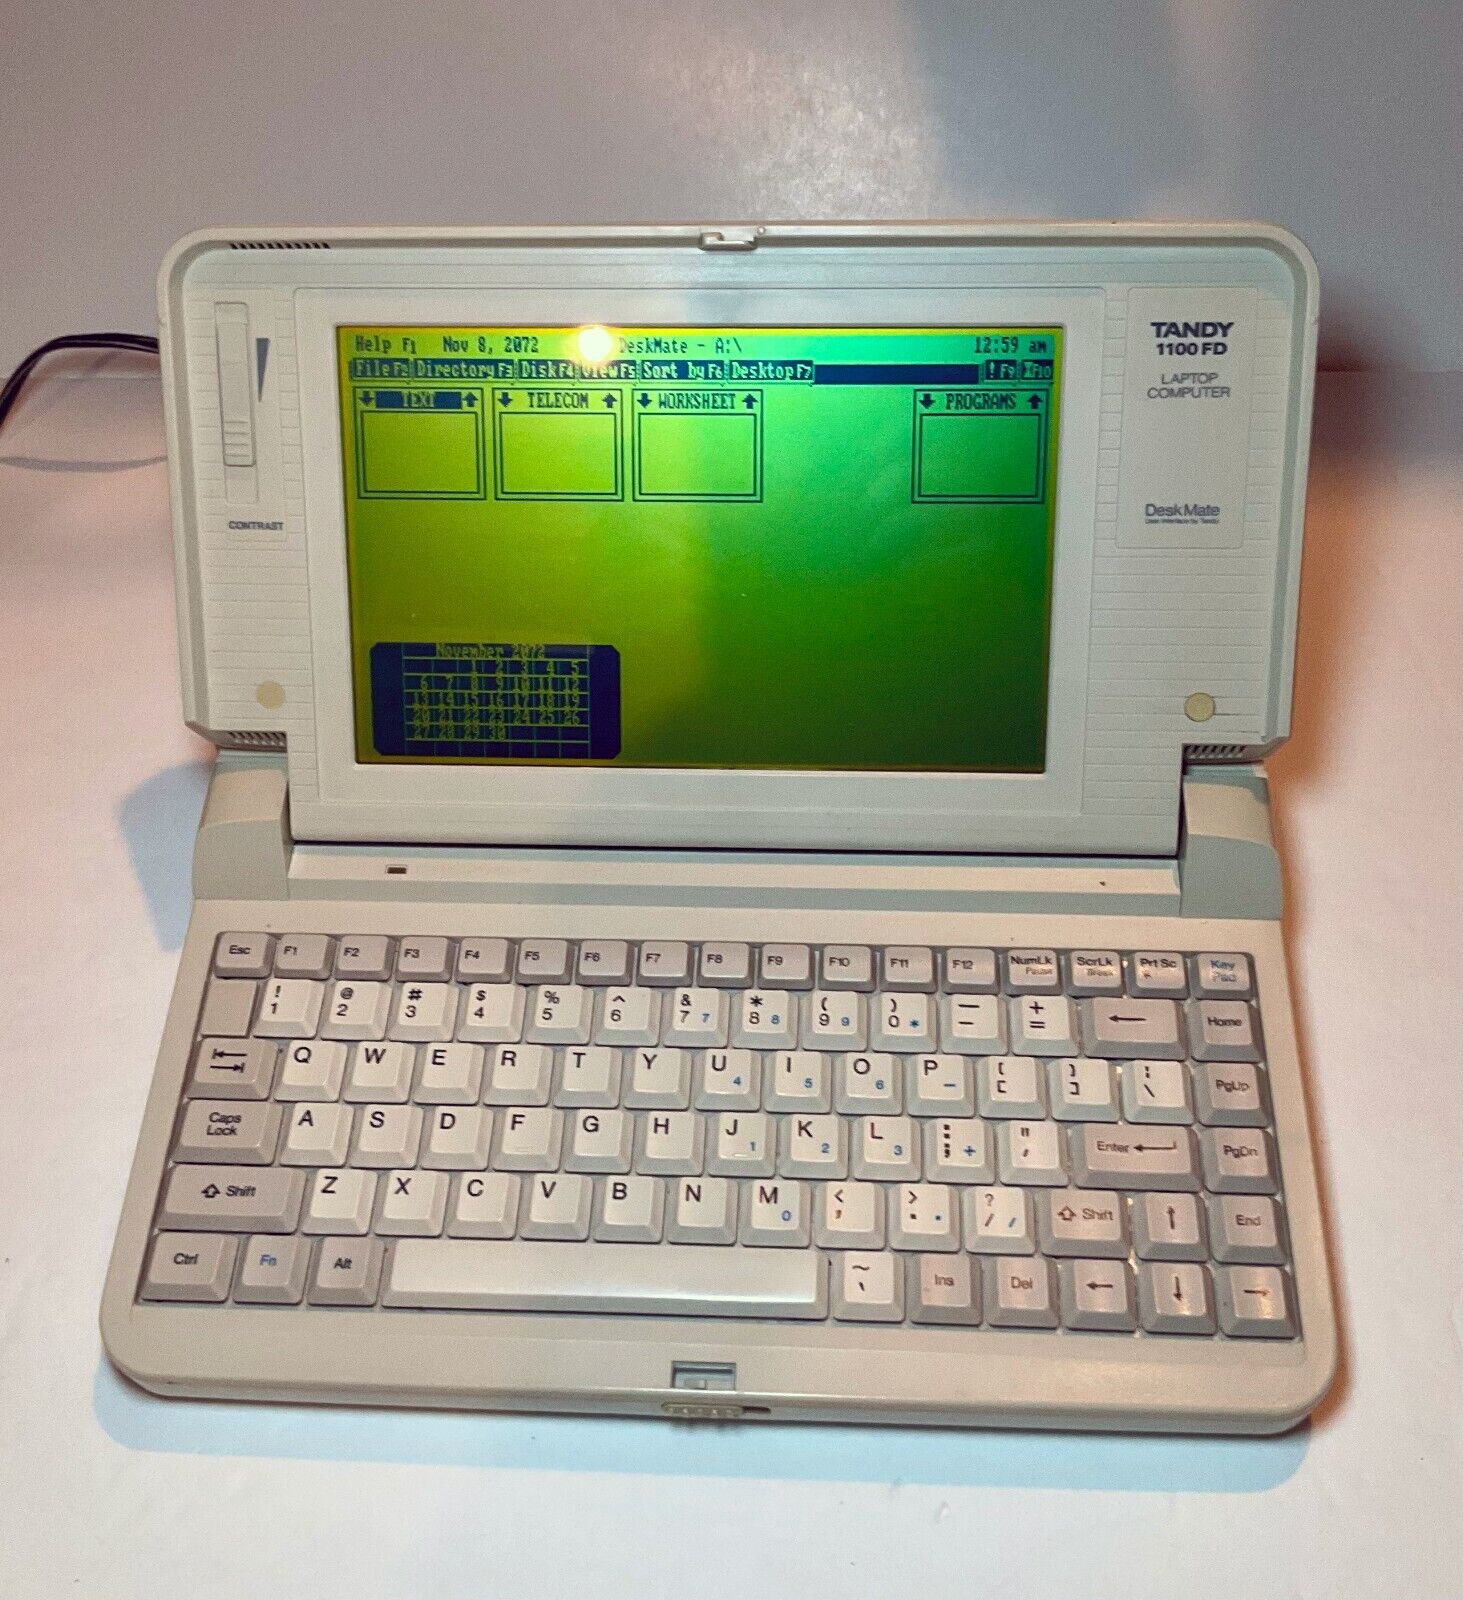 Tandy 1100 FD portable laptop computer bundled with manuals - works great